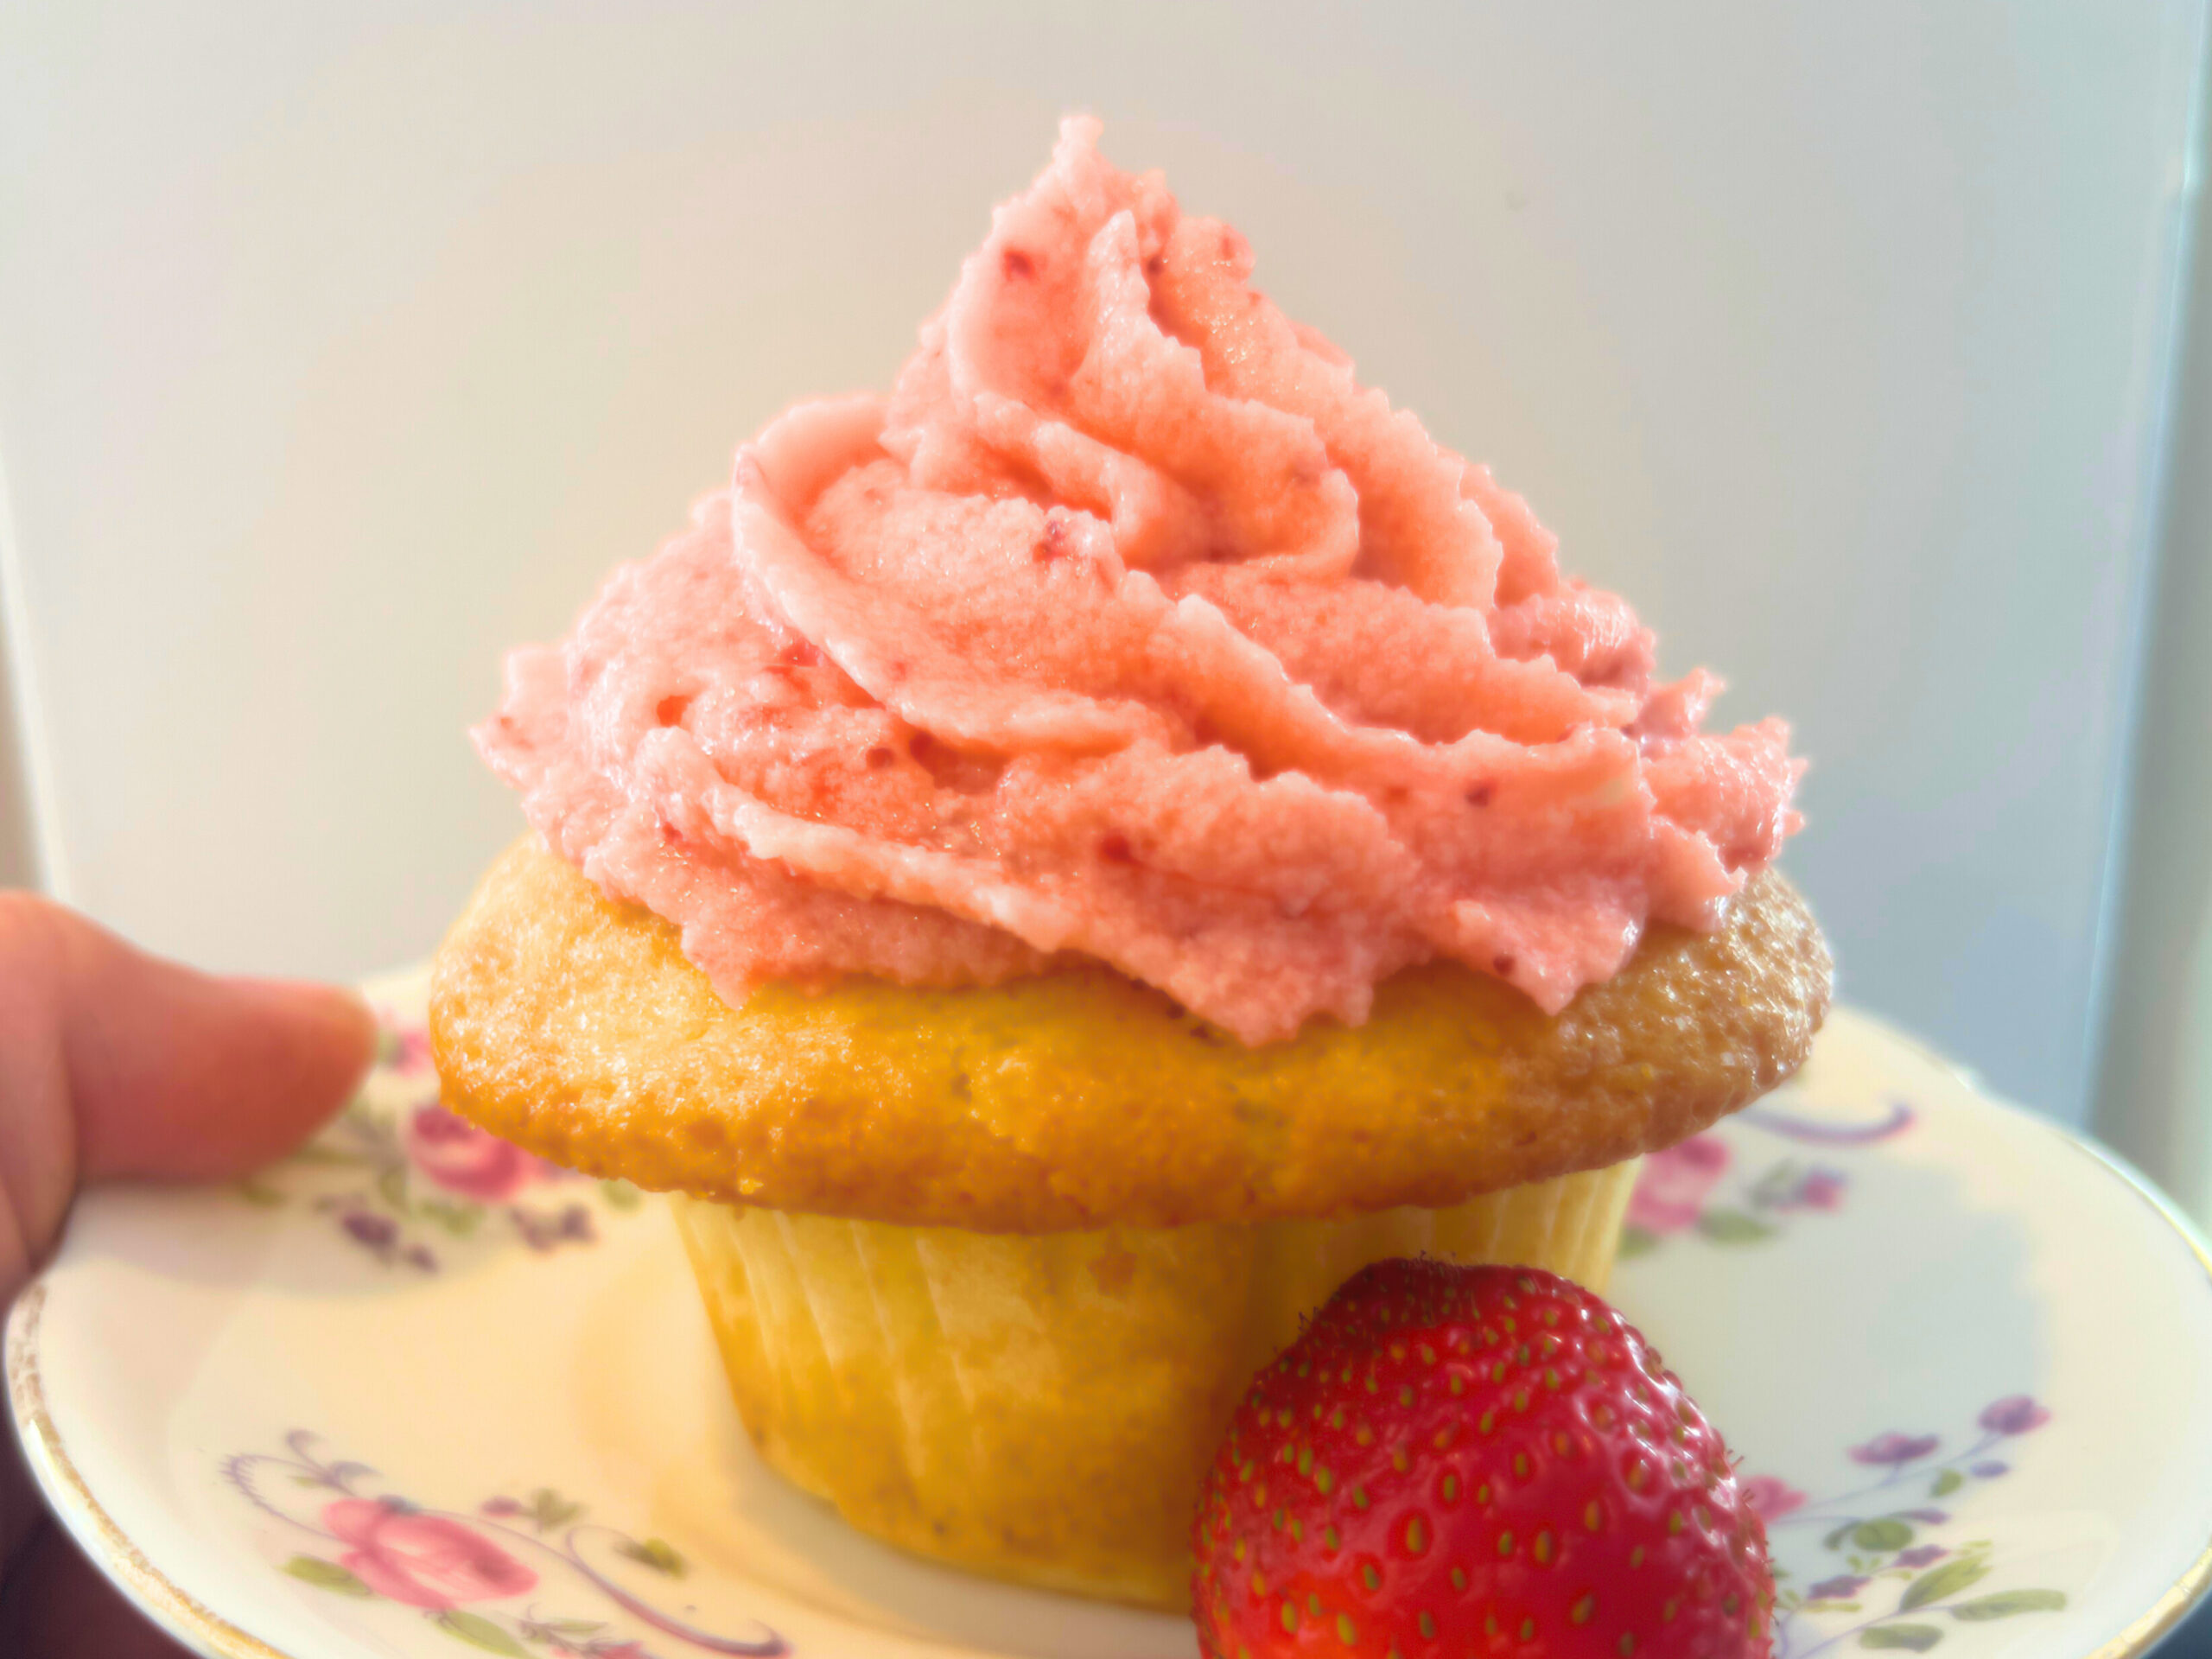 Woman holding a pink floral plate with a vanilla cupcake with pink icing on top. There is a strawberry on the plate as well.